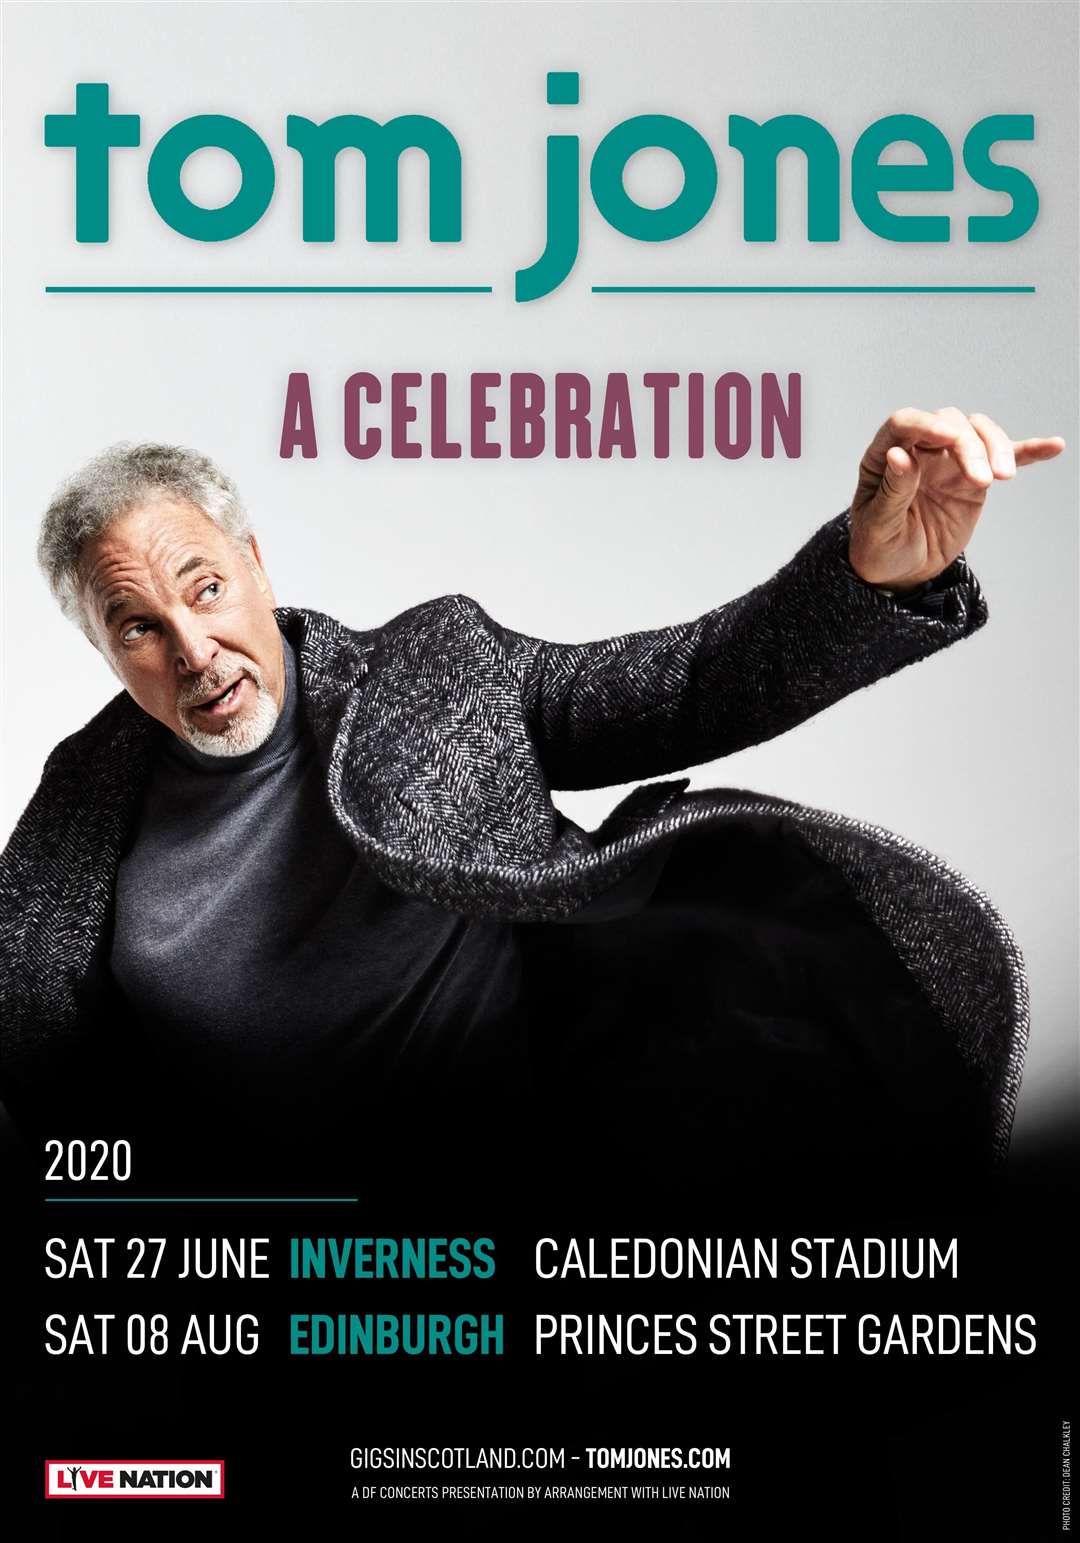 Sir Tom Jones is to perform in Inverness.